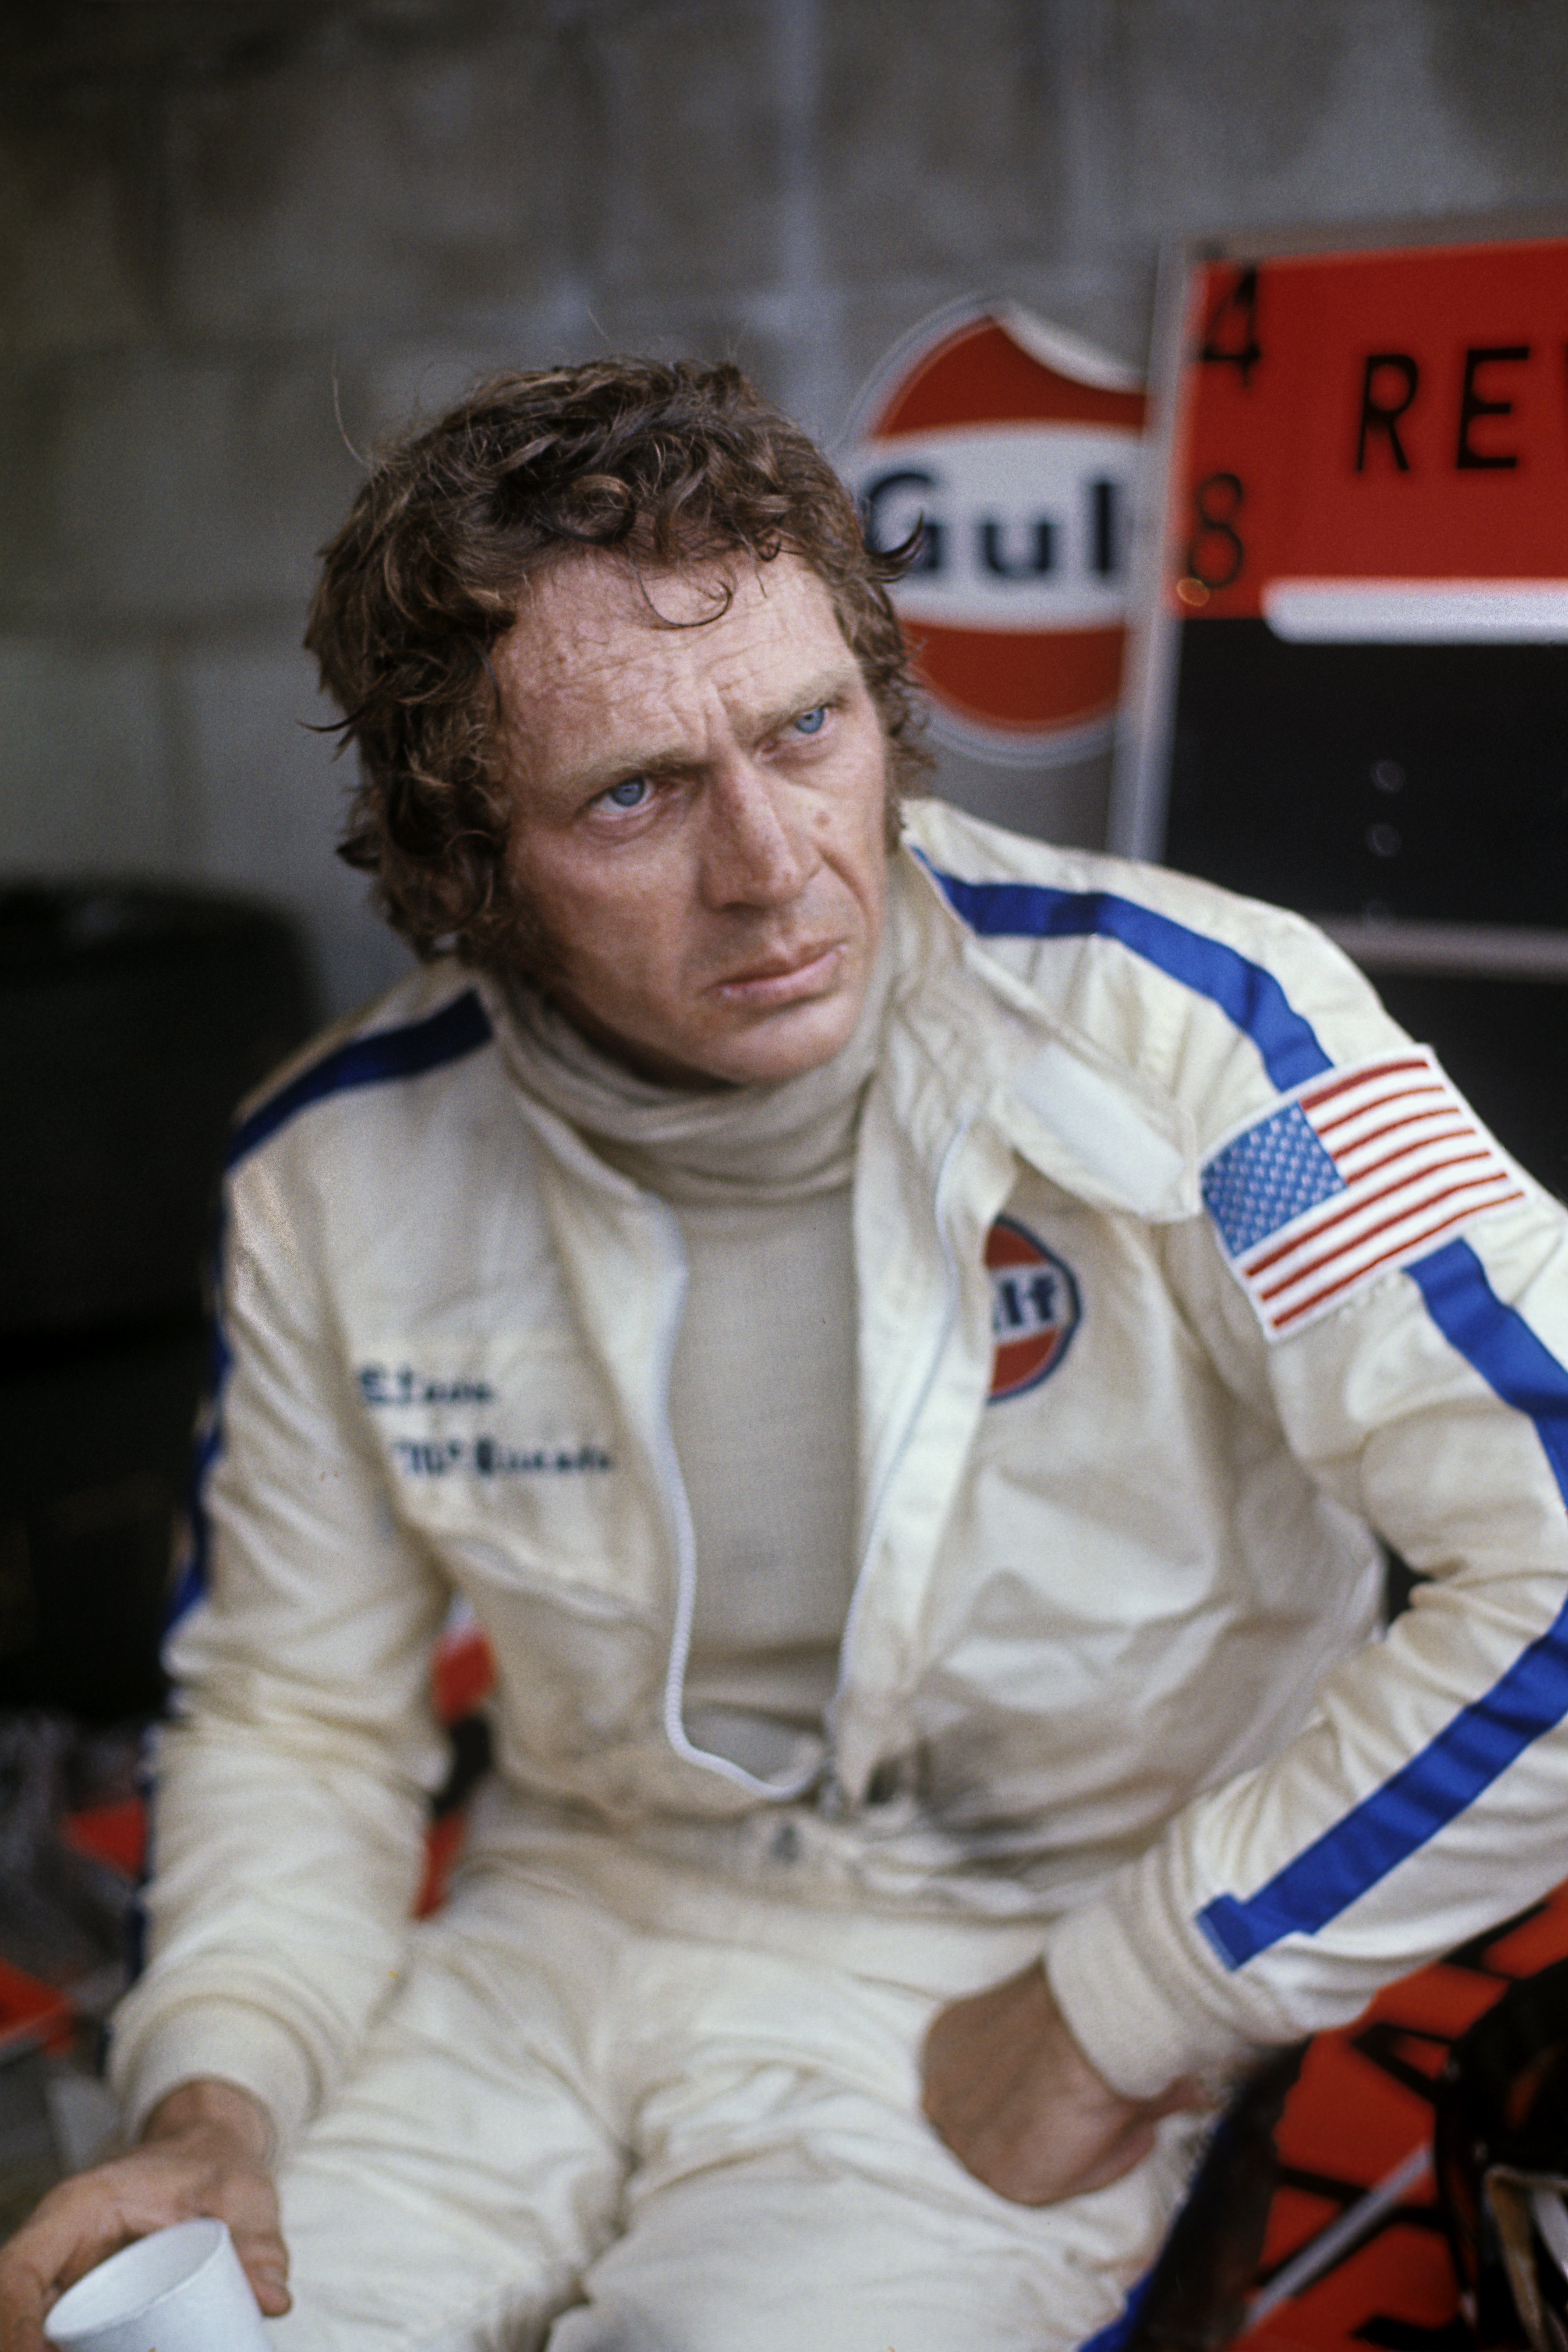 Steve McQueen during the 1970 12 Hours of Sebring endurance race on March 21, 1970 | Photo: Getty Images